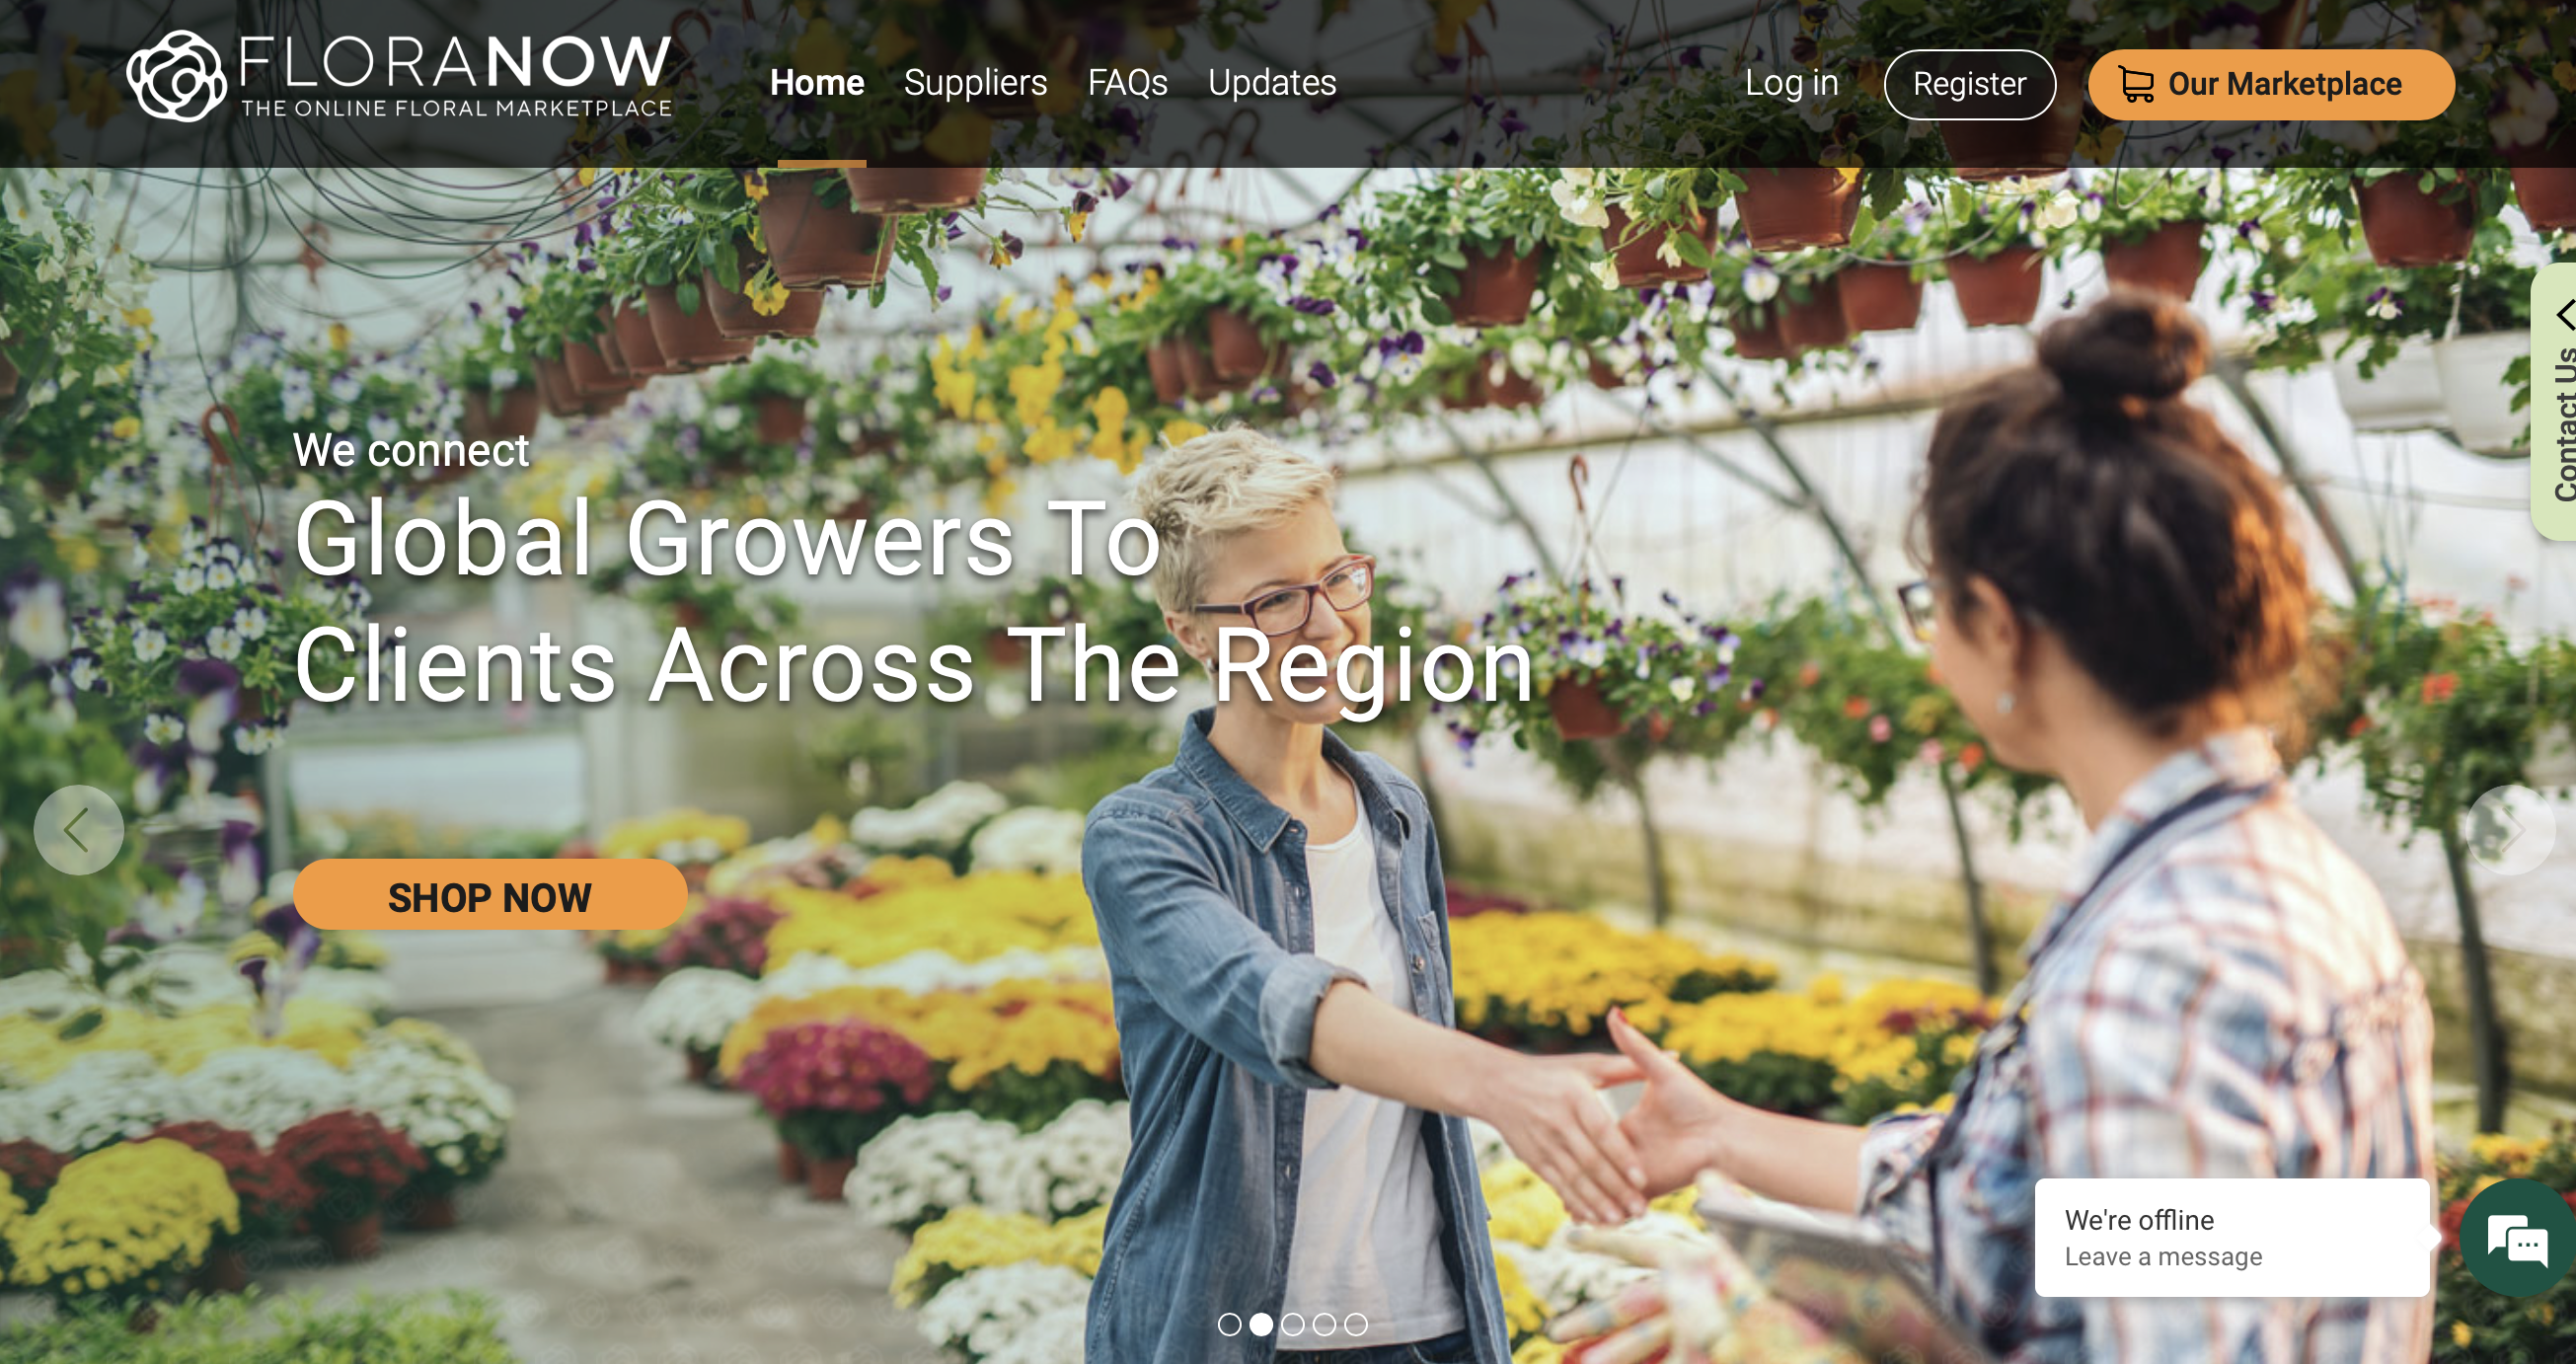 The first online flower trading platform in the Middle East